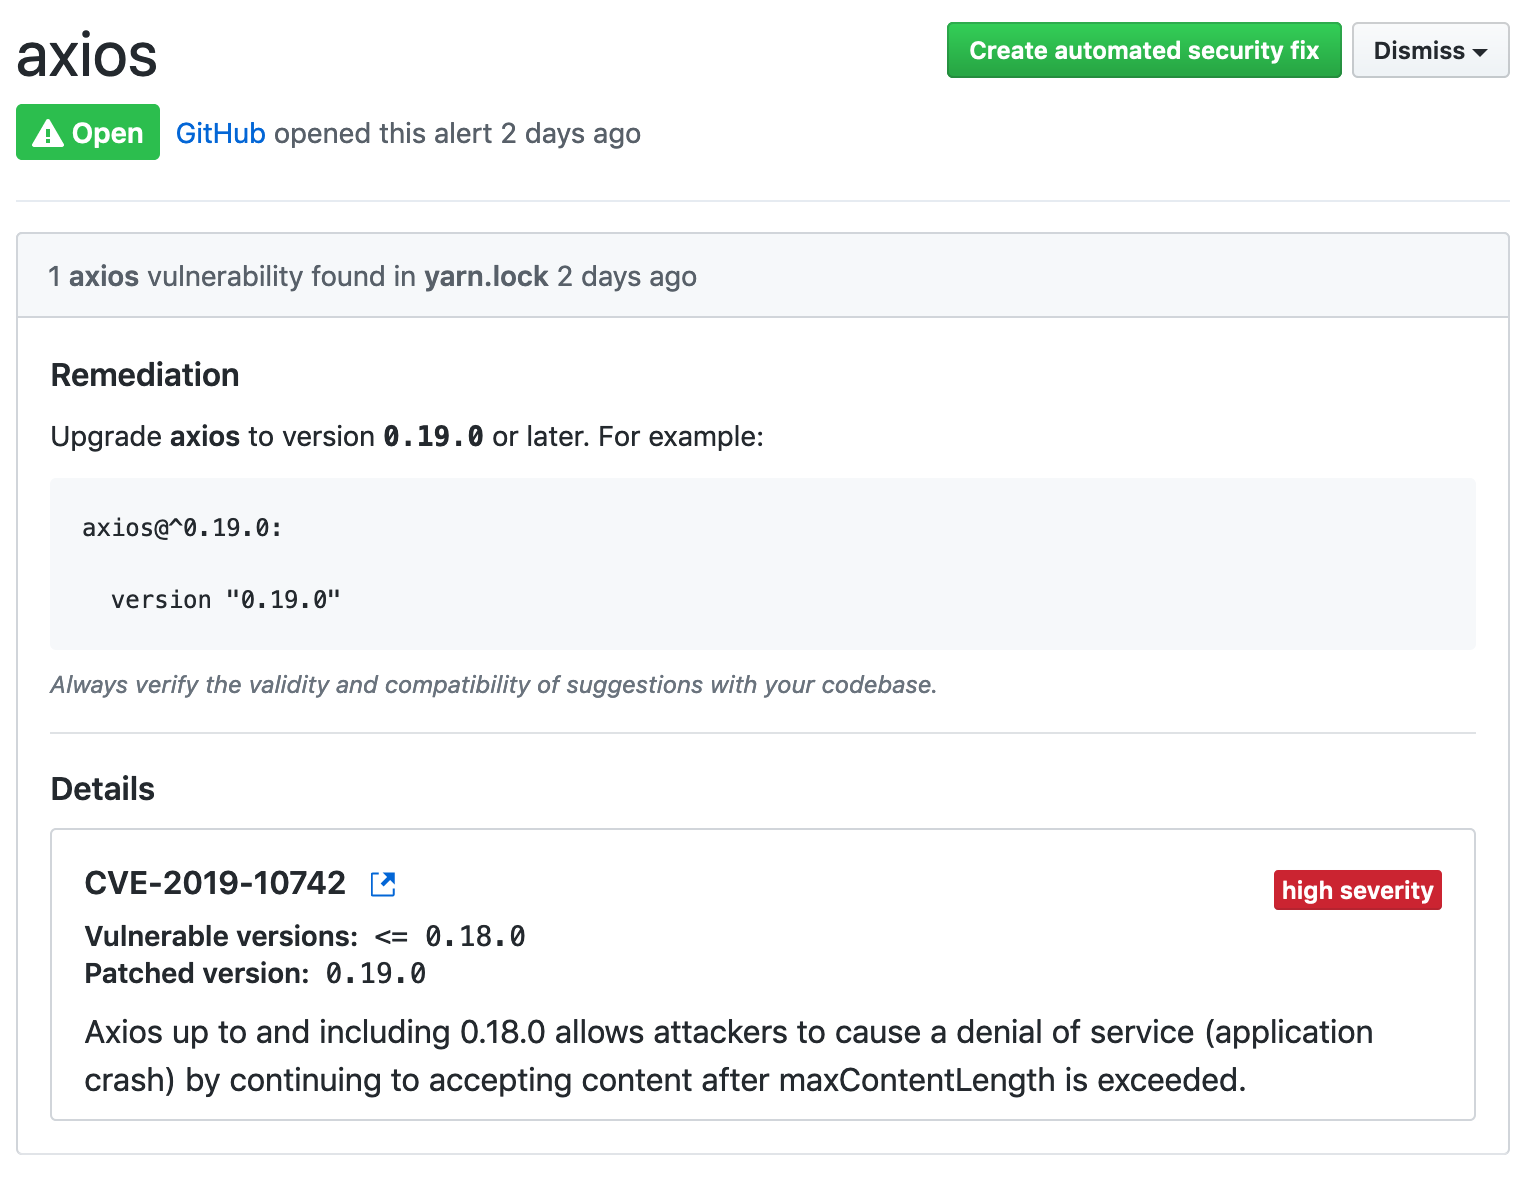 Screenshot of a GitHub notice describing a high severity CVE issued for axiosand recommending to update from 0.18.0 to0.19.0